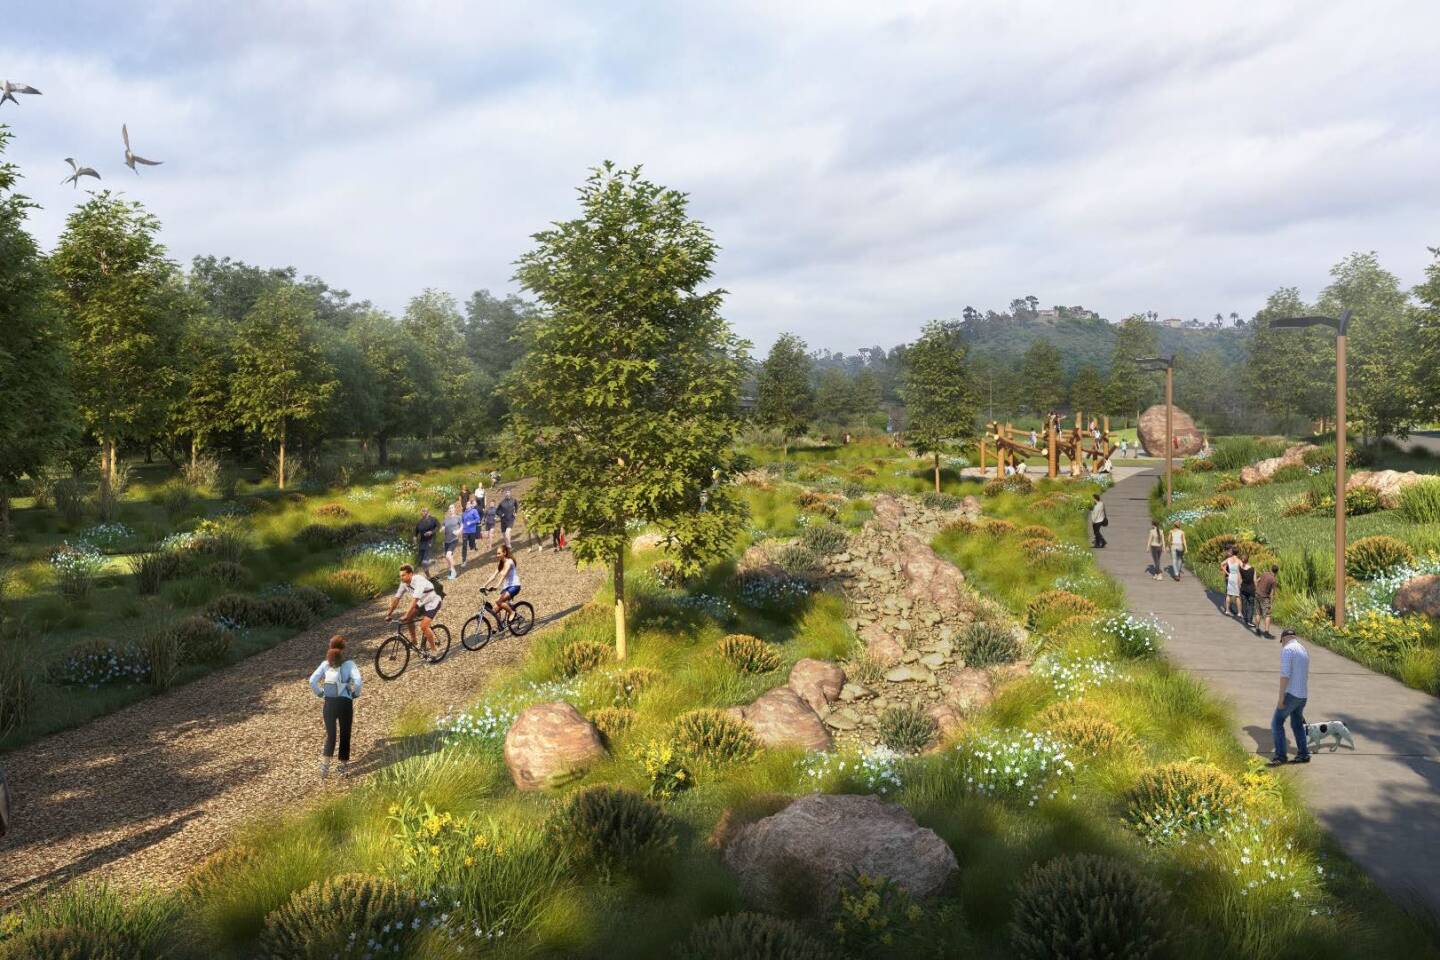 A rendering of the eastern portion of the park, looking south, with a natural path running adjacent to Murphy Canyon Creek. A portion of the hike and path that loops around the Mission Valley property is also shown. In the background, a kids' play area features nature-inspired equipment.